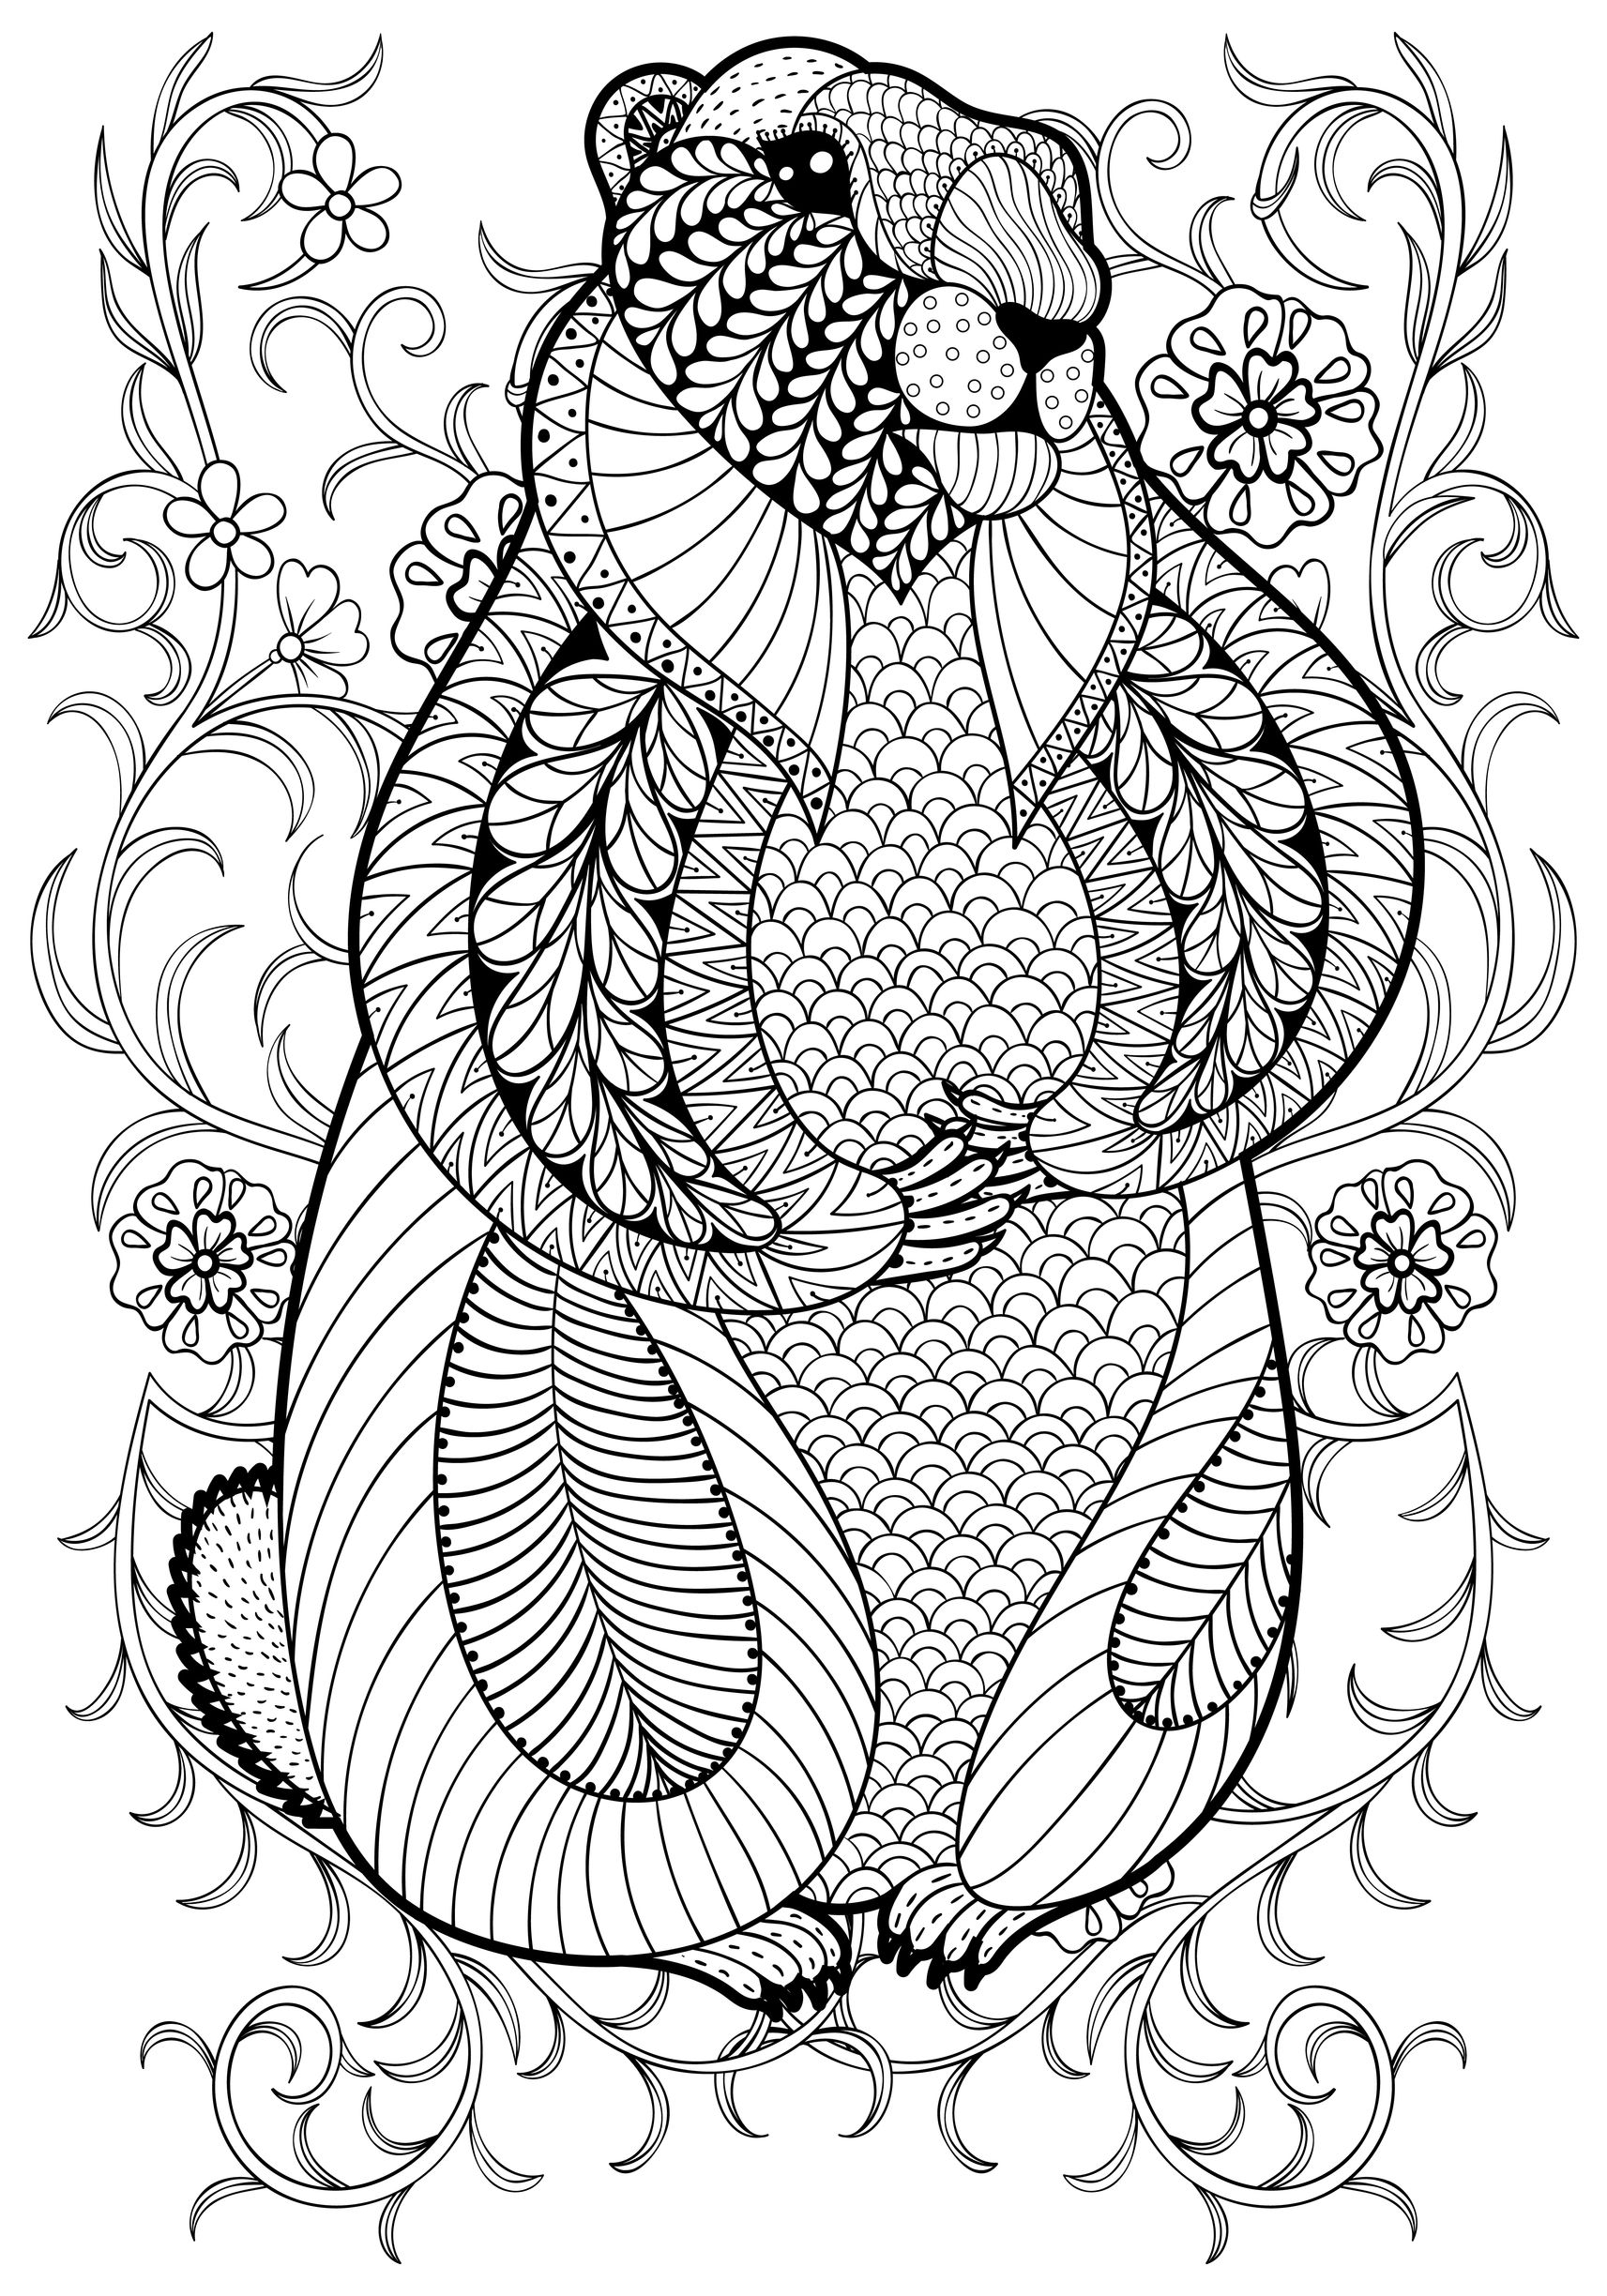 Hand drawn artistic marmot, groundhog in flowers for adult coloring page, Artist : Ipanki   Source : 123rf